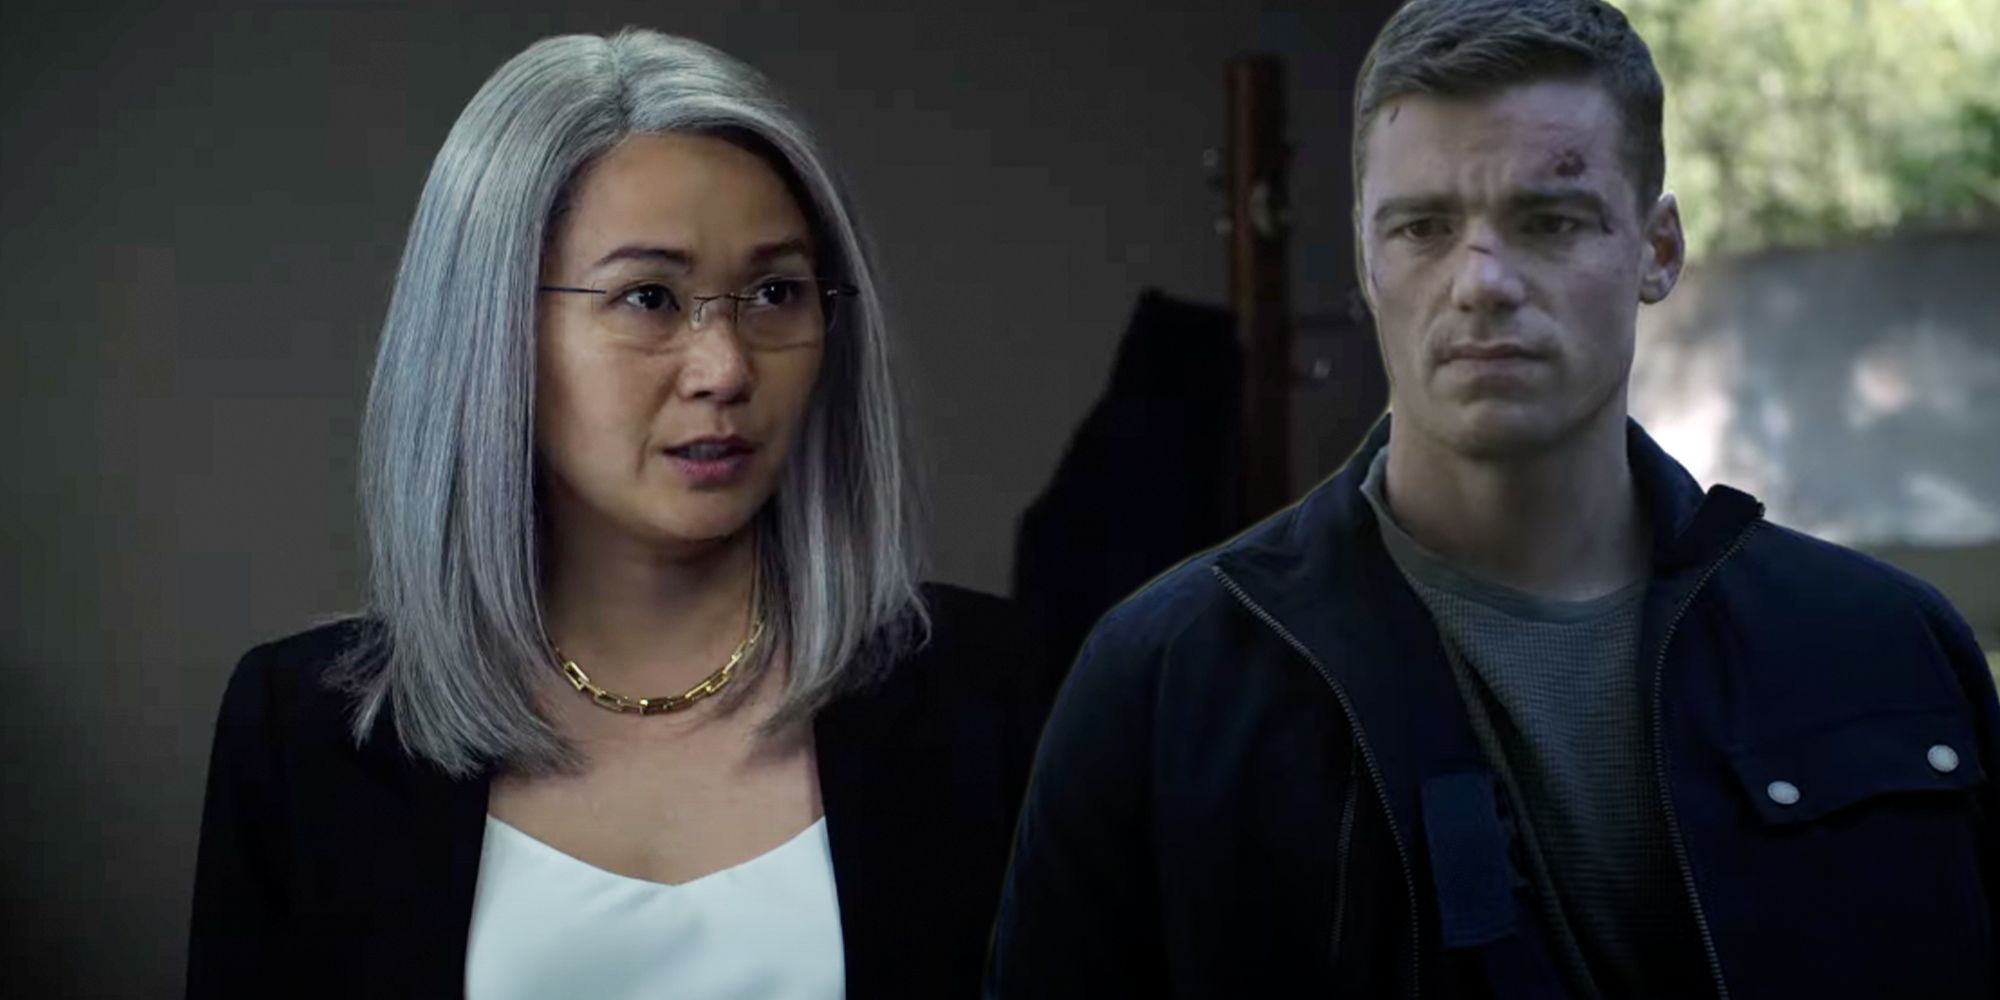 Hong Chau and Gabriel Basso as Diane Farr and Peter Sutherland in The Night Agent